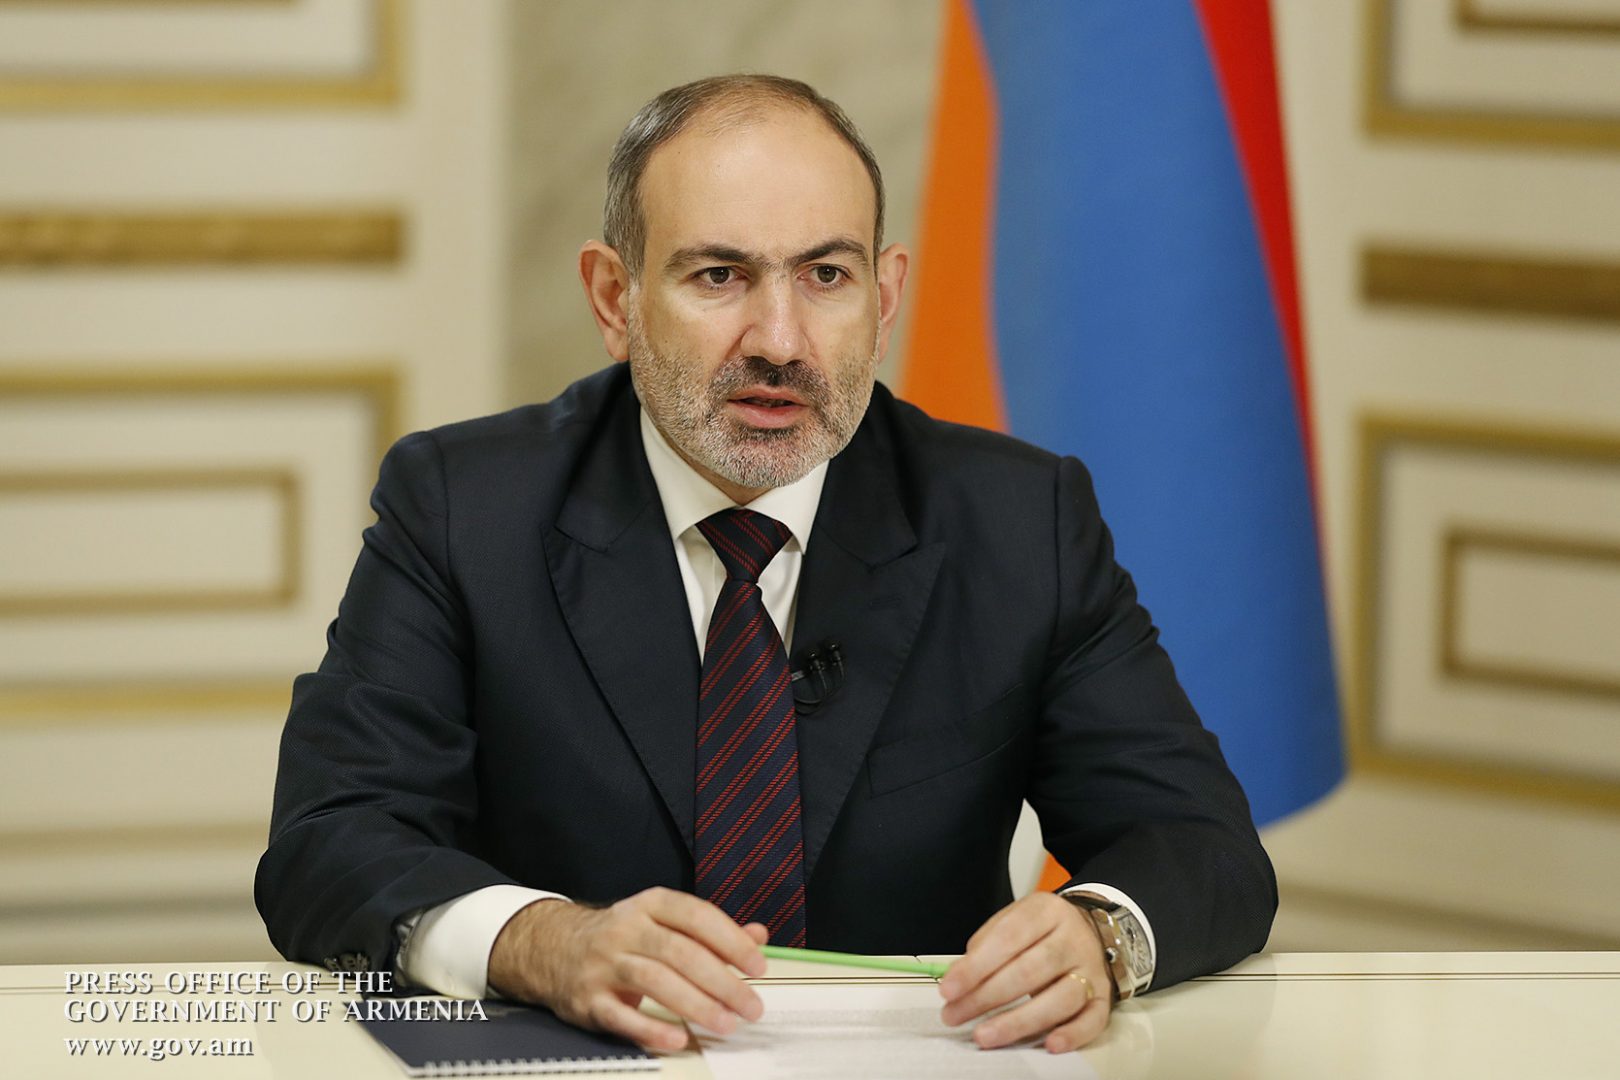 PM Pashinyan calls General Staff statement a “military coup attempt” - The US Armenians